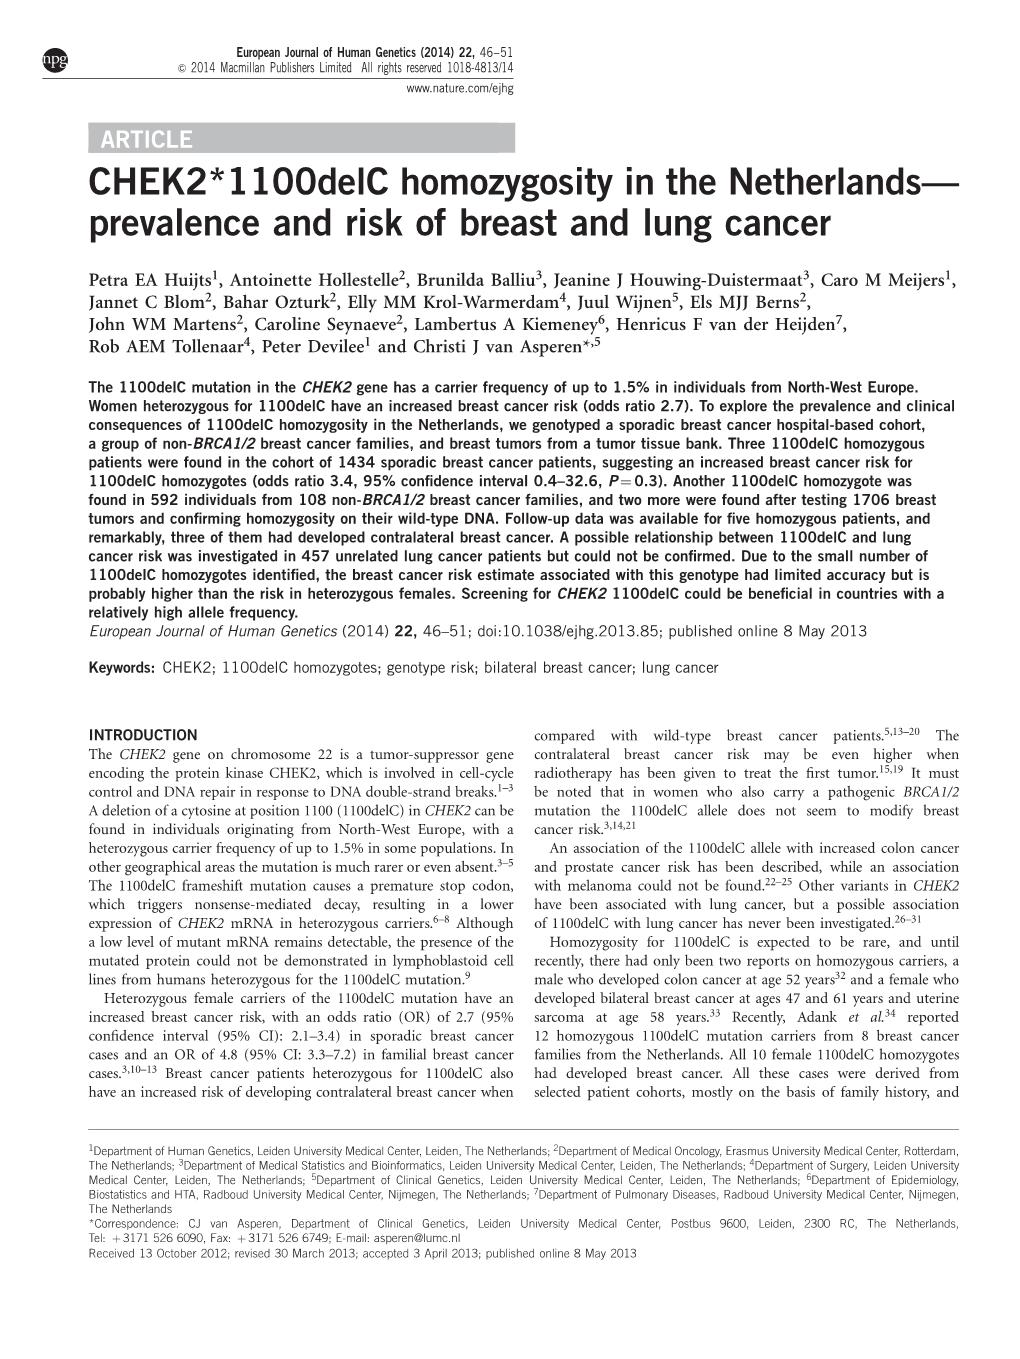 Prevalence and Risk of Breast and Lung Cancer